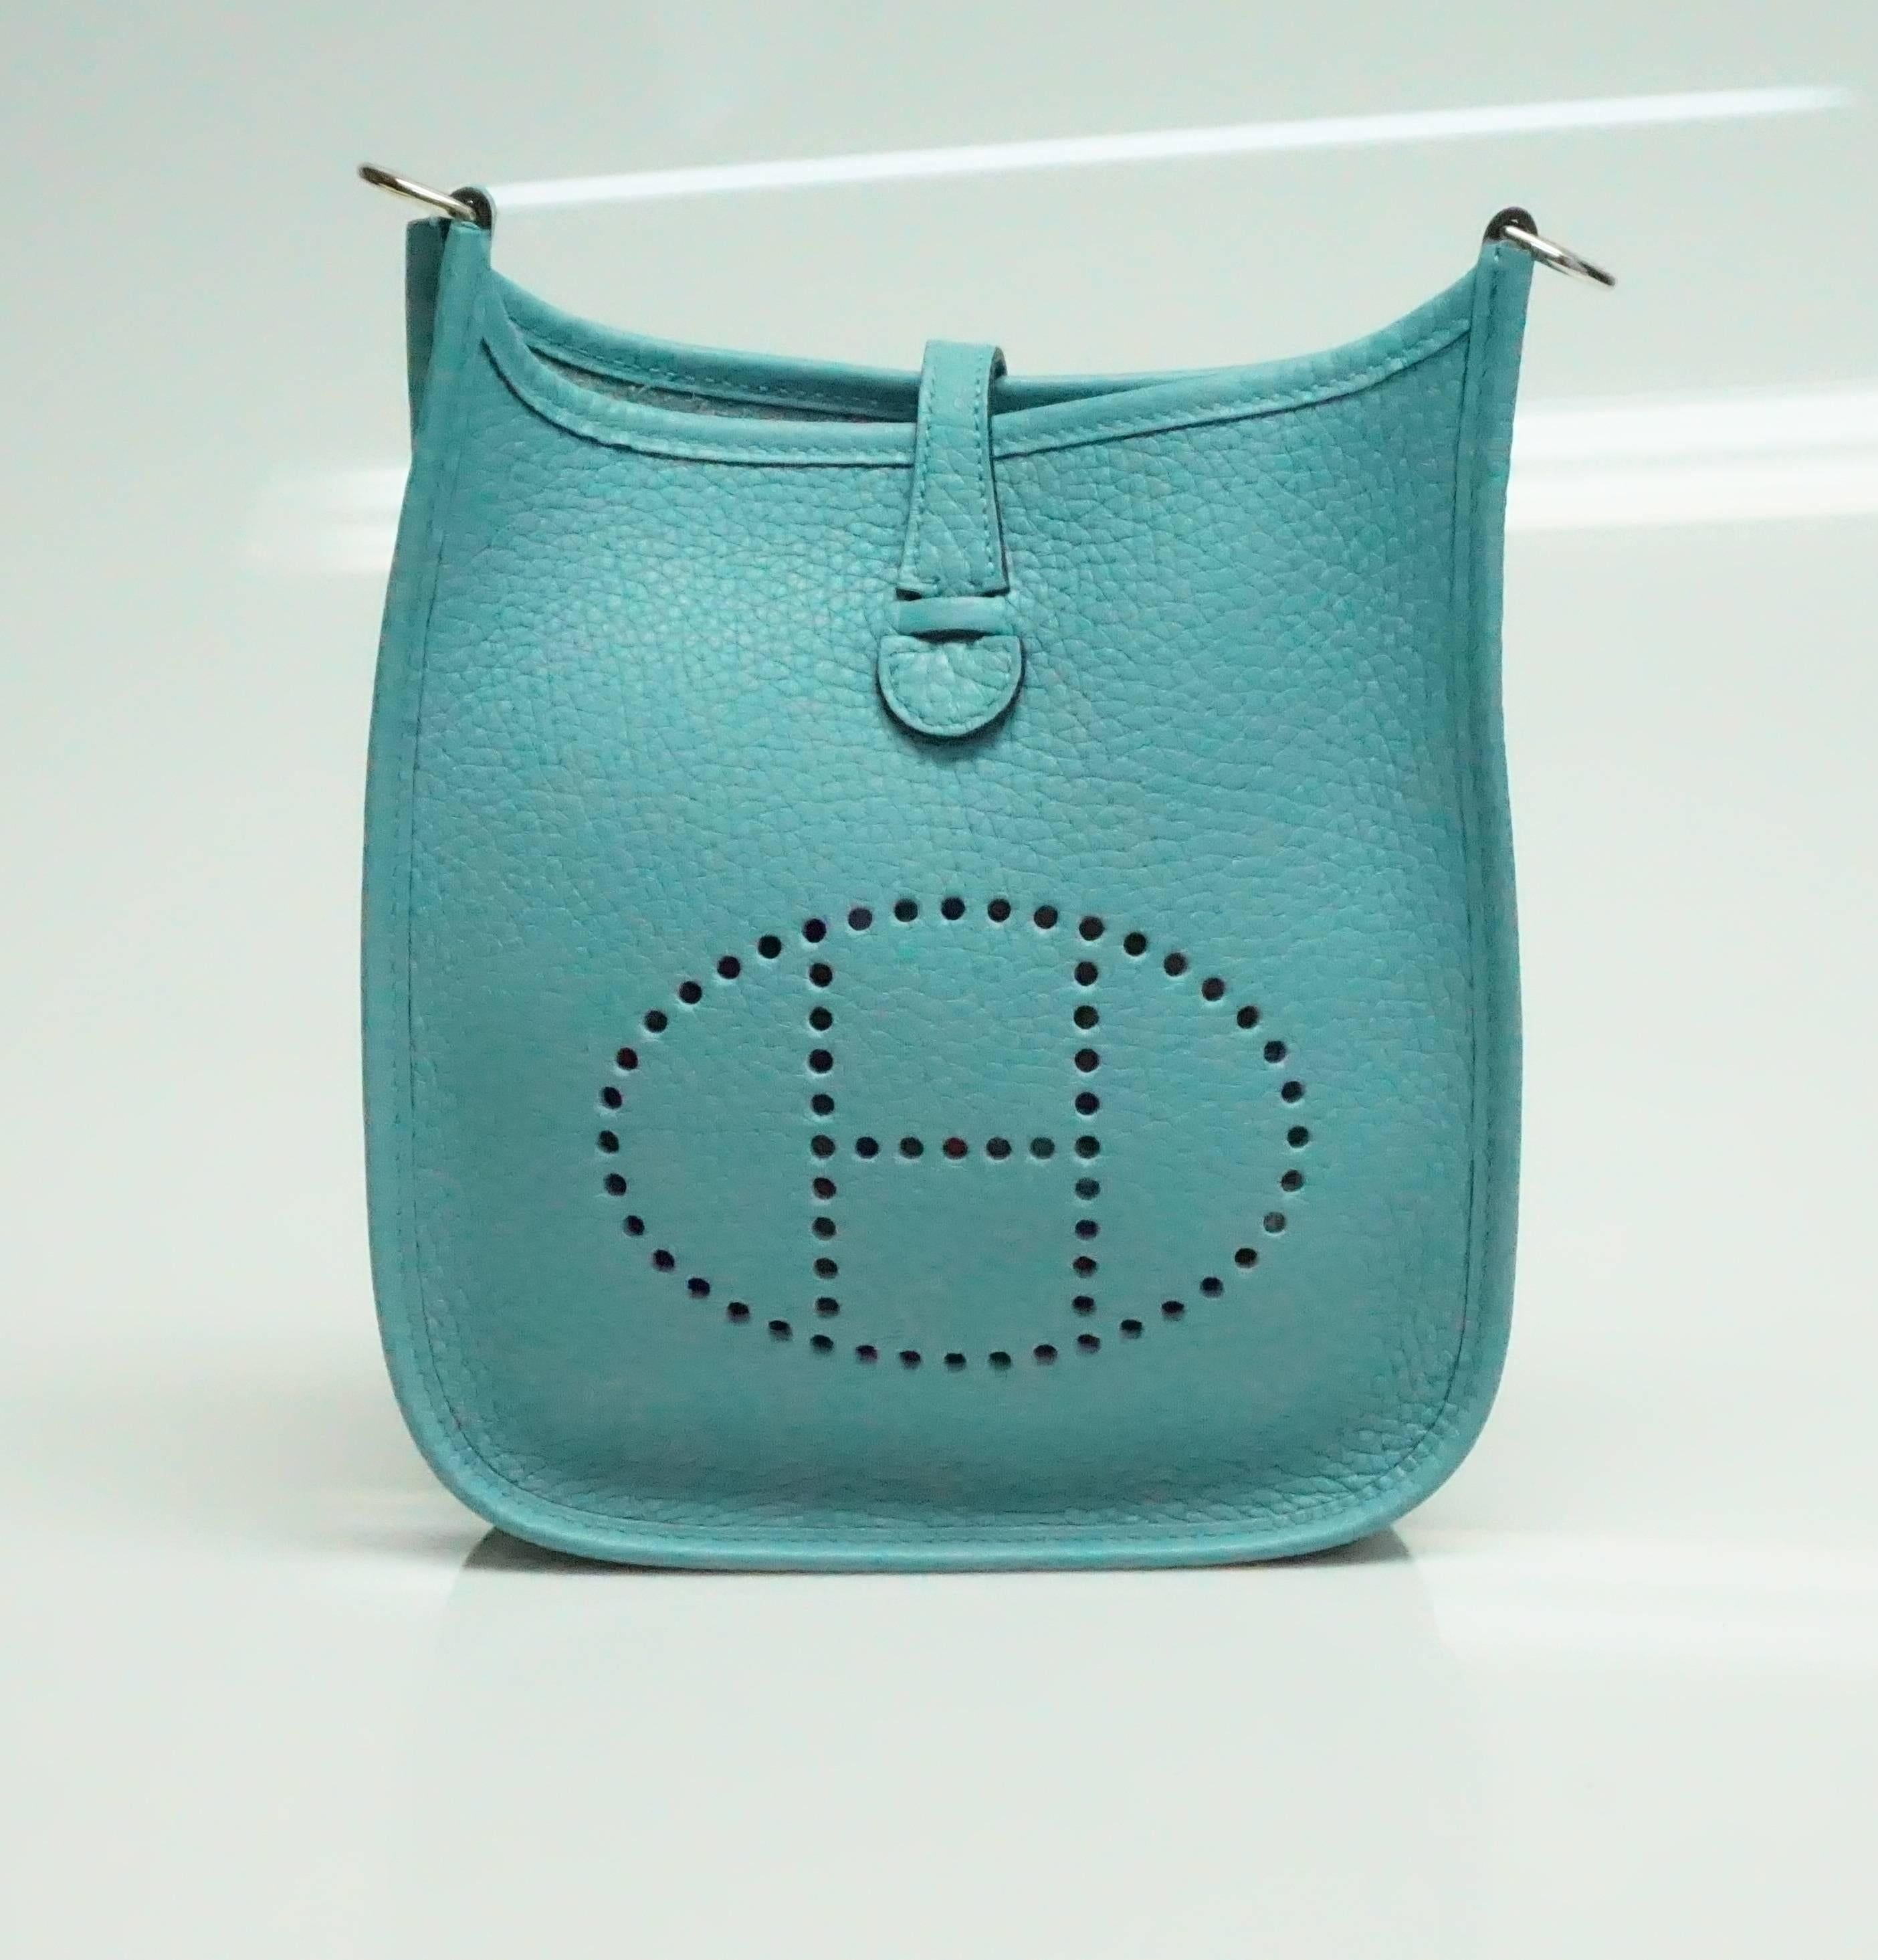 This beautiful Hermes TPM Mini Evelyne crossbody is made of Clemence leather in the color Aqua. This bag  is new/never carried and comes with the duster and box. 

Measurements
Length: 7